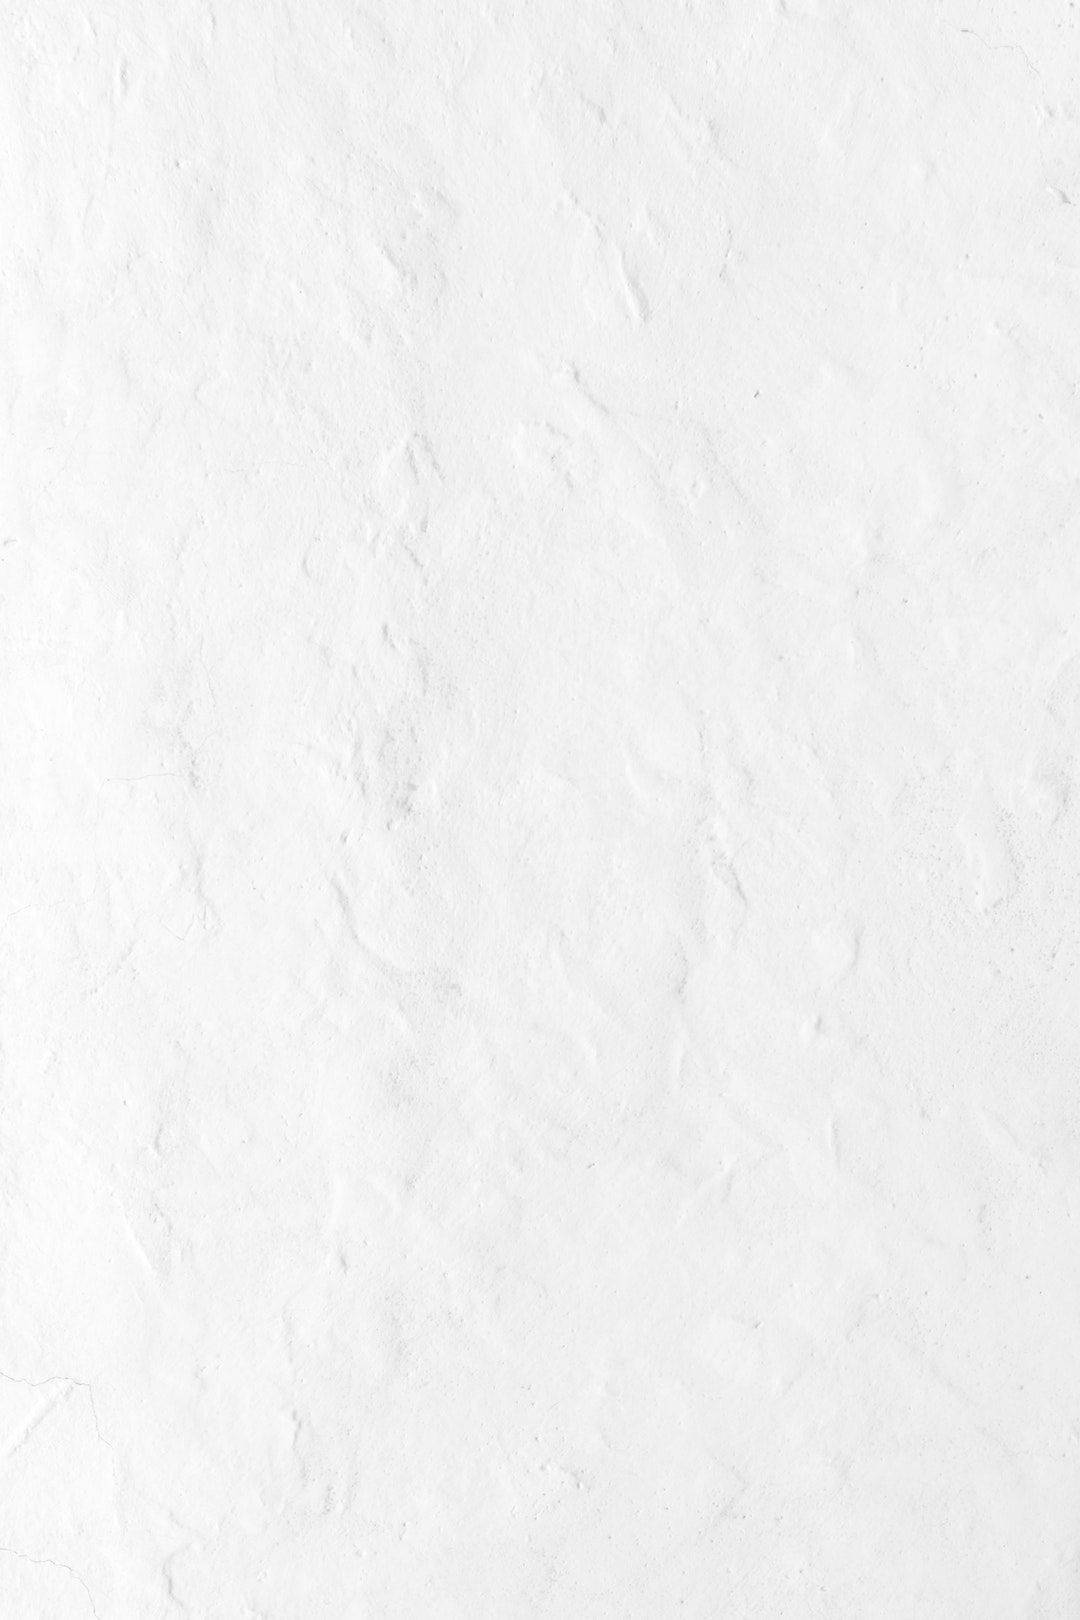 Textured Wall White Screen Phone Background Background